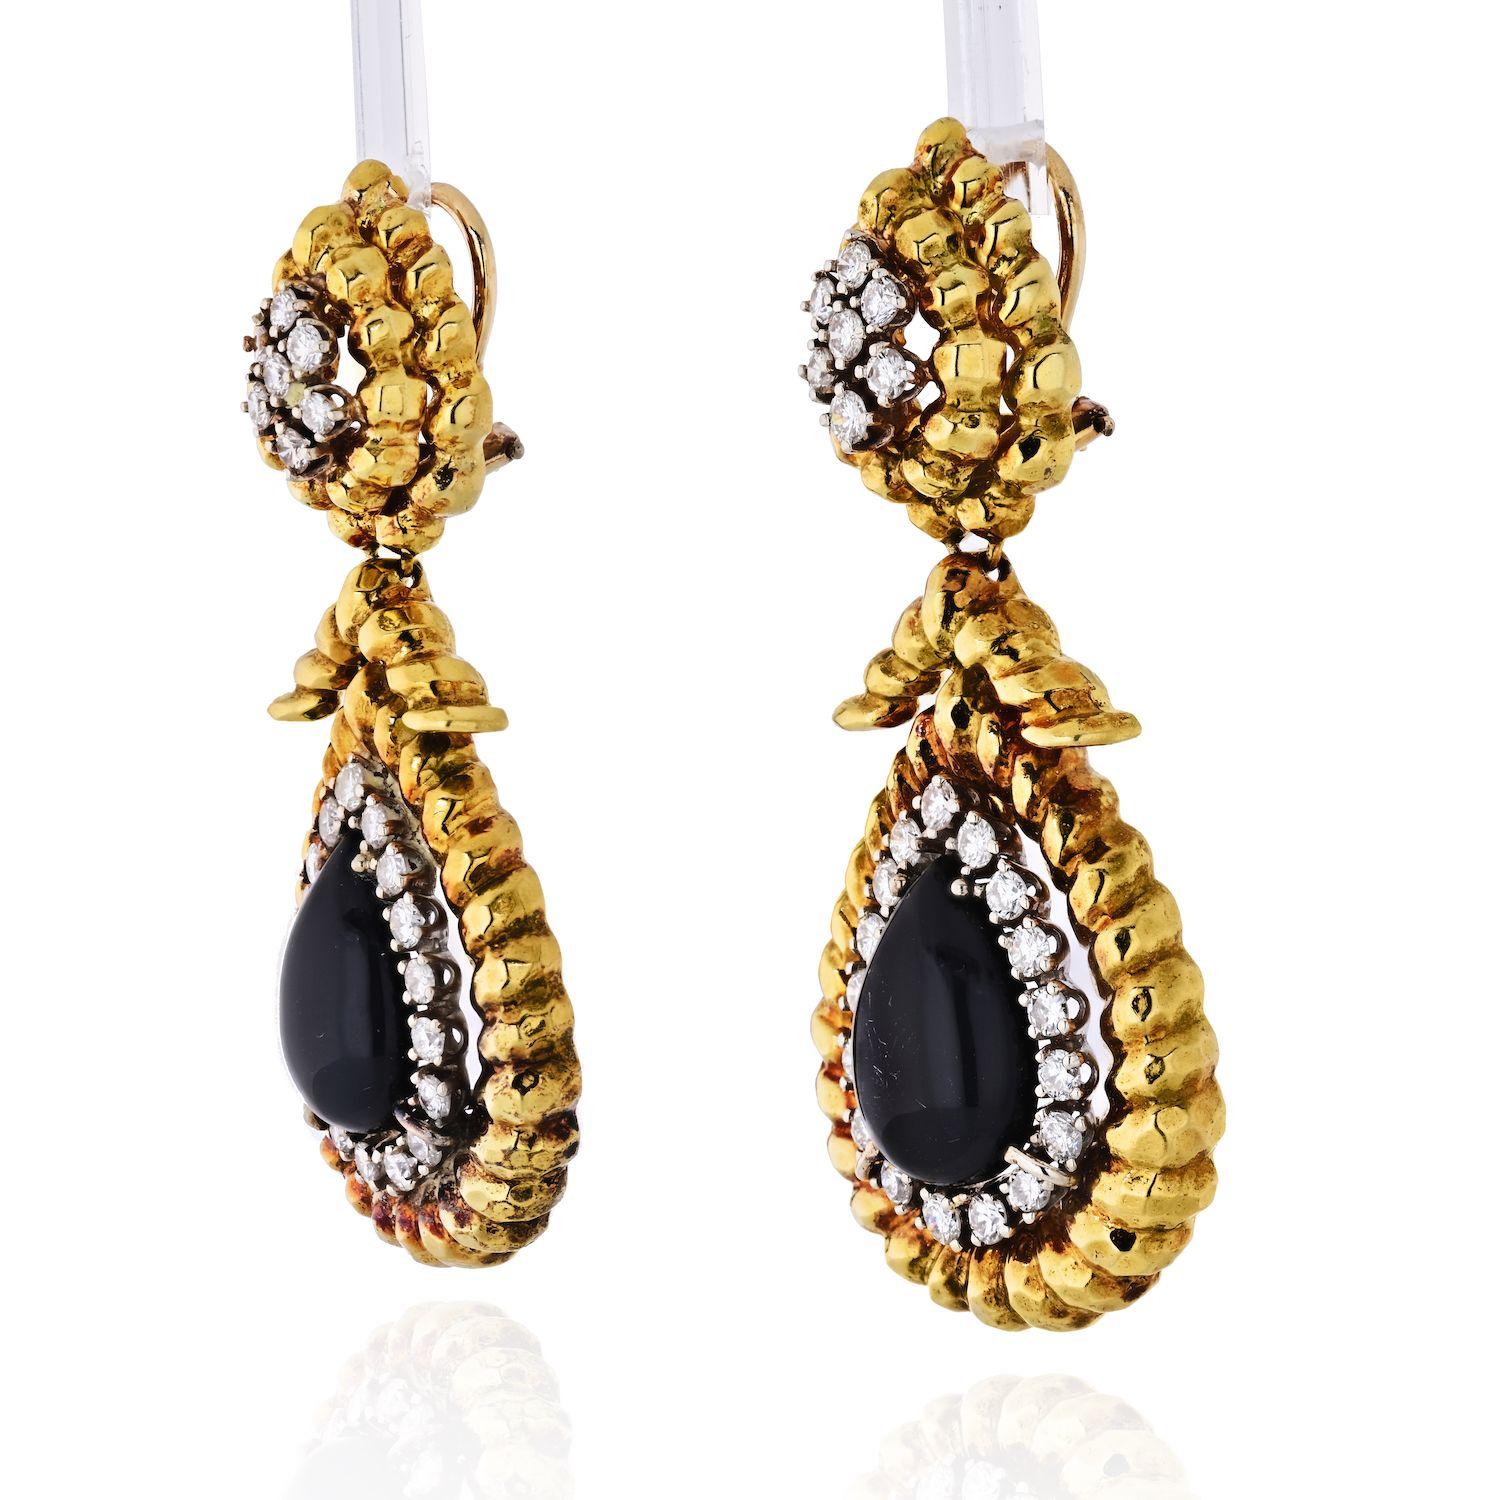 DAVID WEBB 18K Gold, Platinum, Onyx, and Diamond Pendant Earclips
each earclip featuring seven round brilliant-cut diamonds suspending a teardrop-shape pendant centering a cabochon pear-shape onyx measuring approx. 15.60 x 10.75 x 5.00 mm. framed by